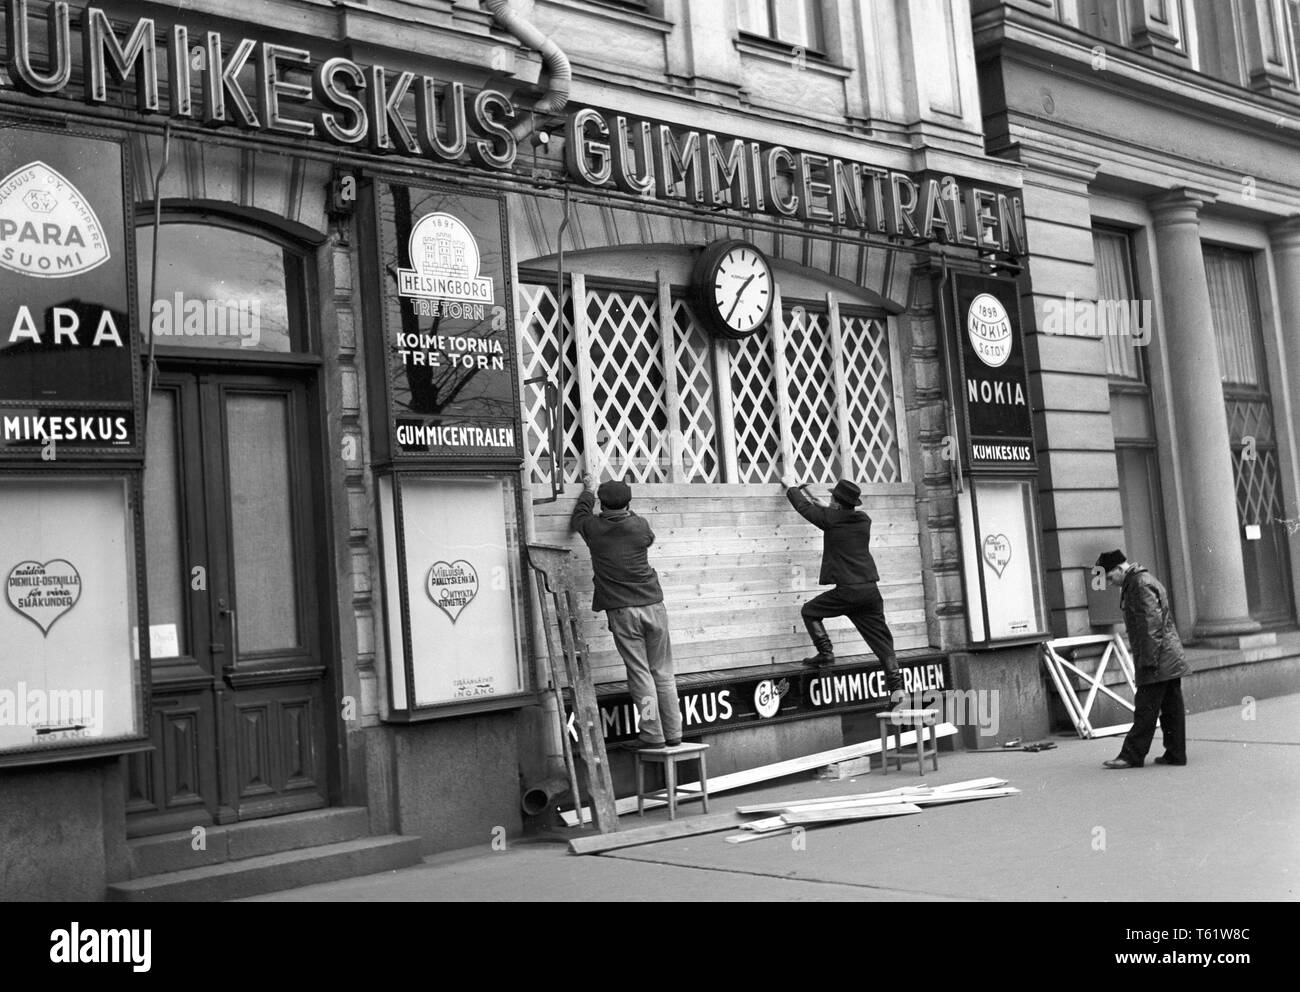 The Winter War. A military conflict between the Soviet union and Finland. It began with a Soviet invasion on november 1939 when Soviet infantery crossed the border on the Karelian Isthmus.  Here the Finnish capitol Helsinki shop owners put up protective wood in front of their store window. More then 100000 bombs hit Helsinki during the war.   December 1939. Photo Kristoffersson ref 92-8 Stock Photo